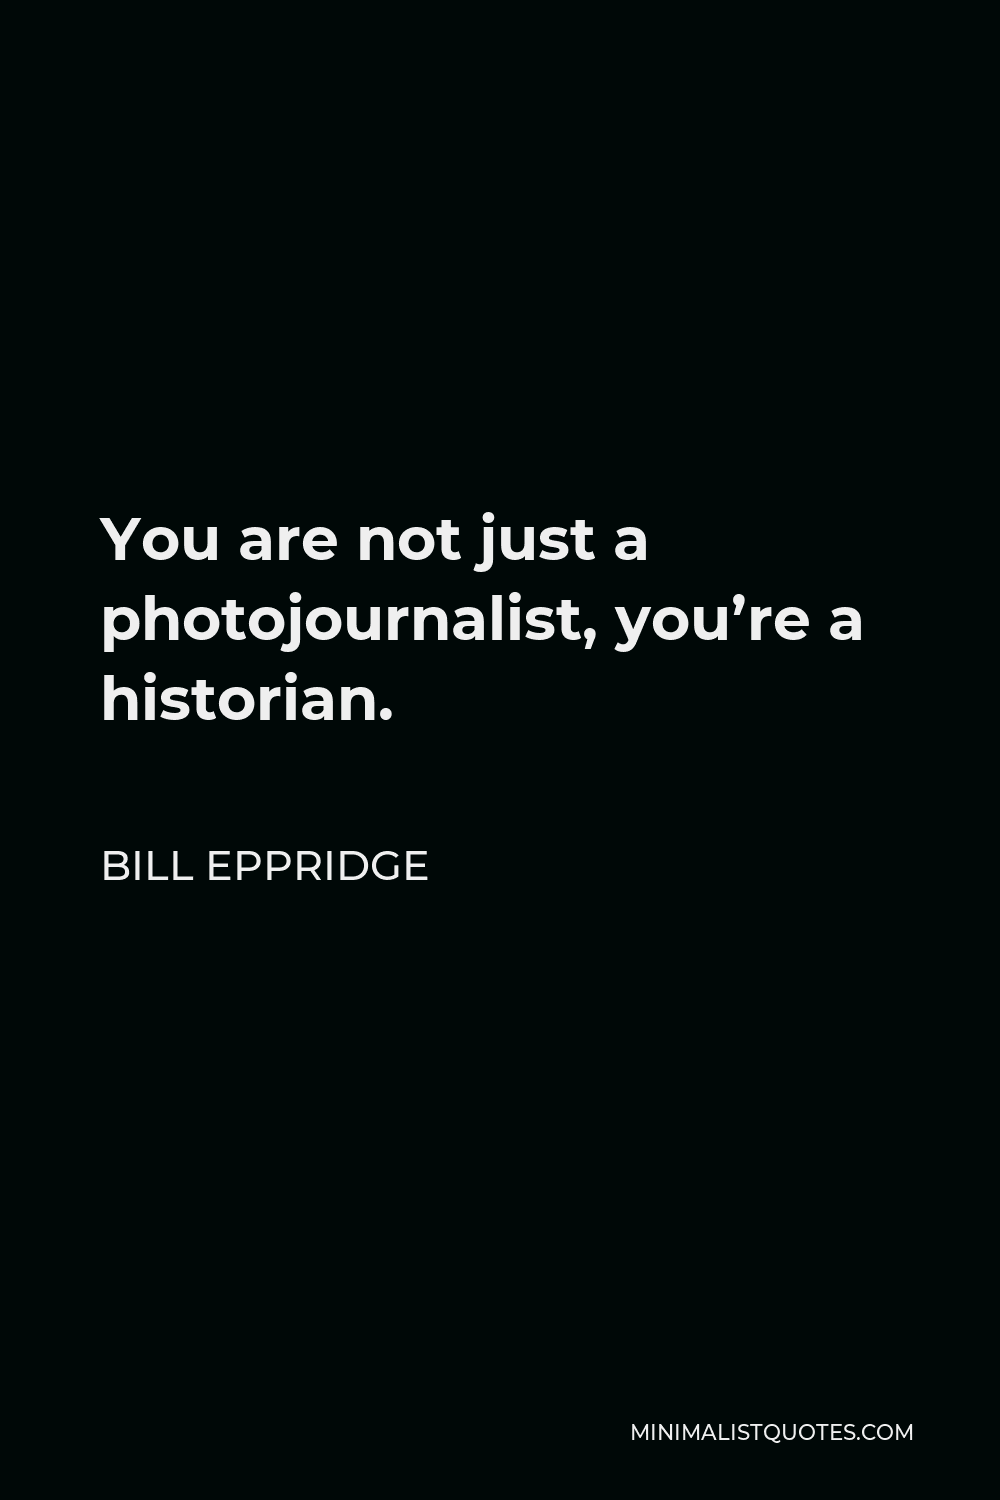 Bill Eppridge Quote - You are not just a photojournalist, you’re a historian.